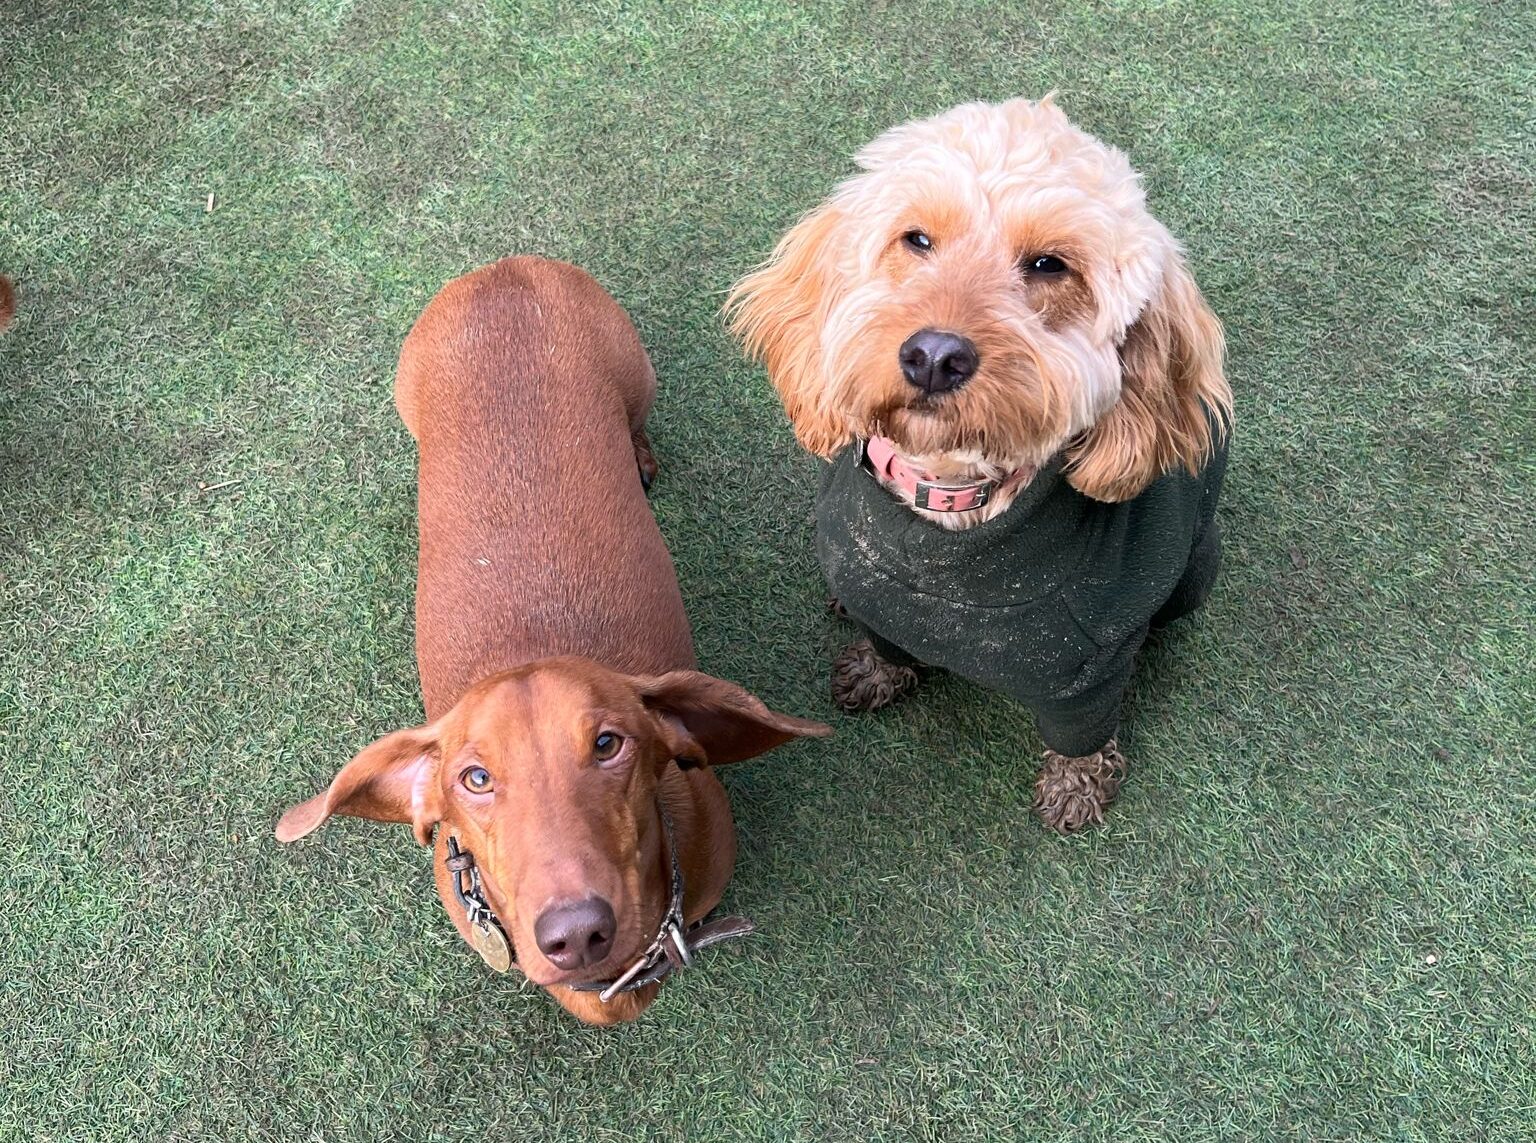 Danbury doggy day care - two dogs posing for a picture